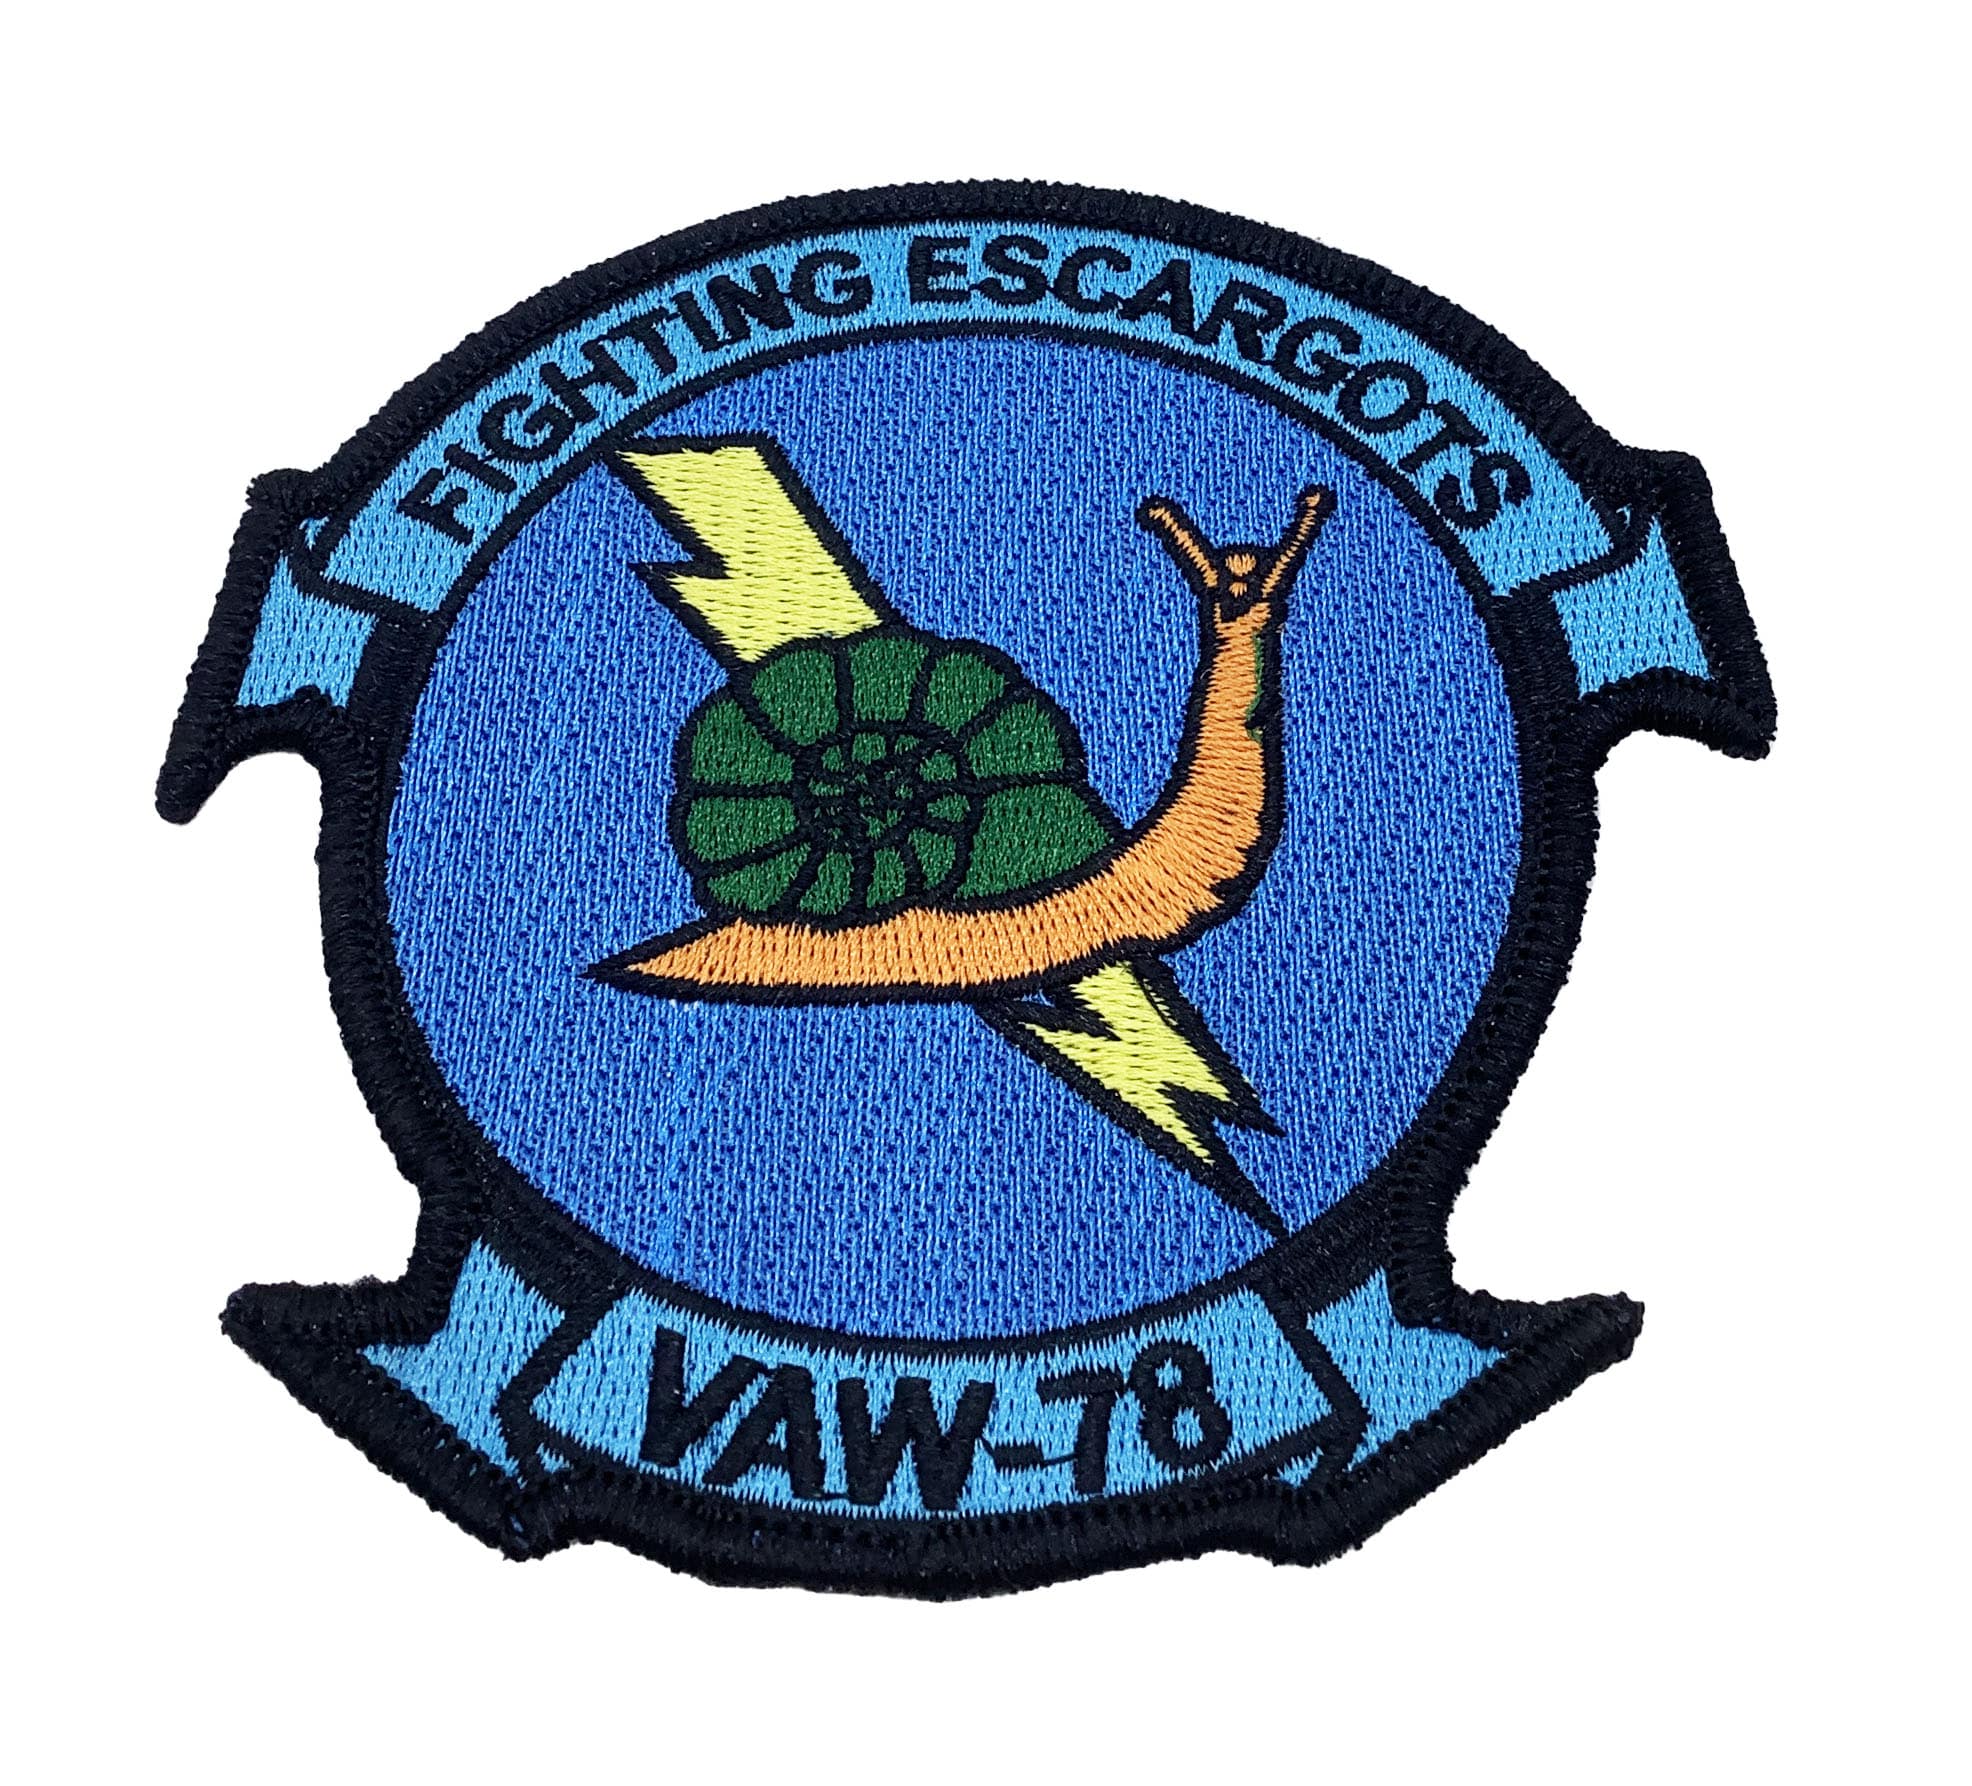 VAW-78 Fighting Escargots Patch – No Hook and Loop